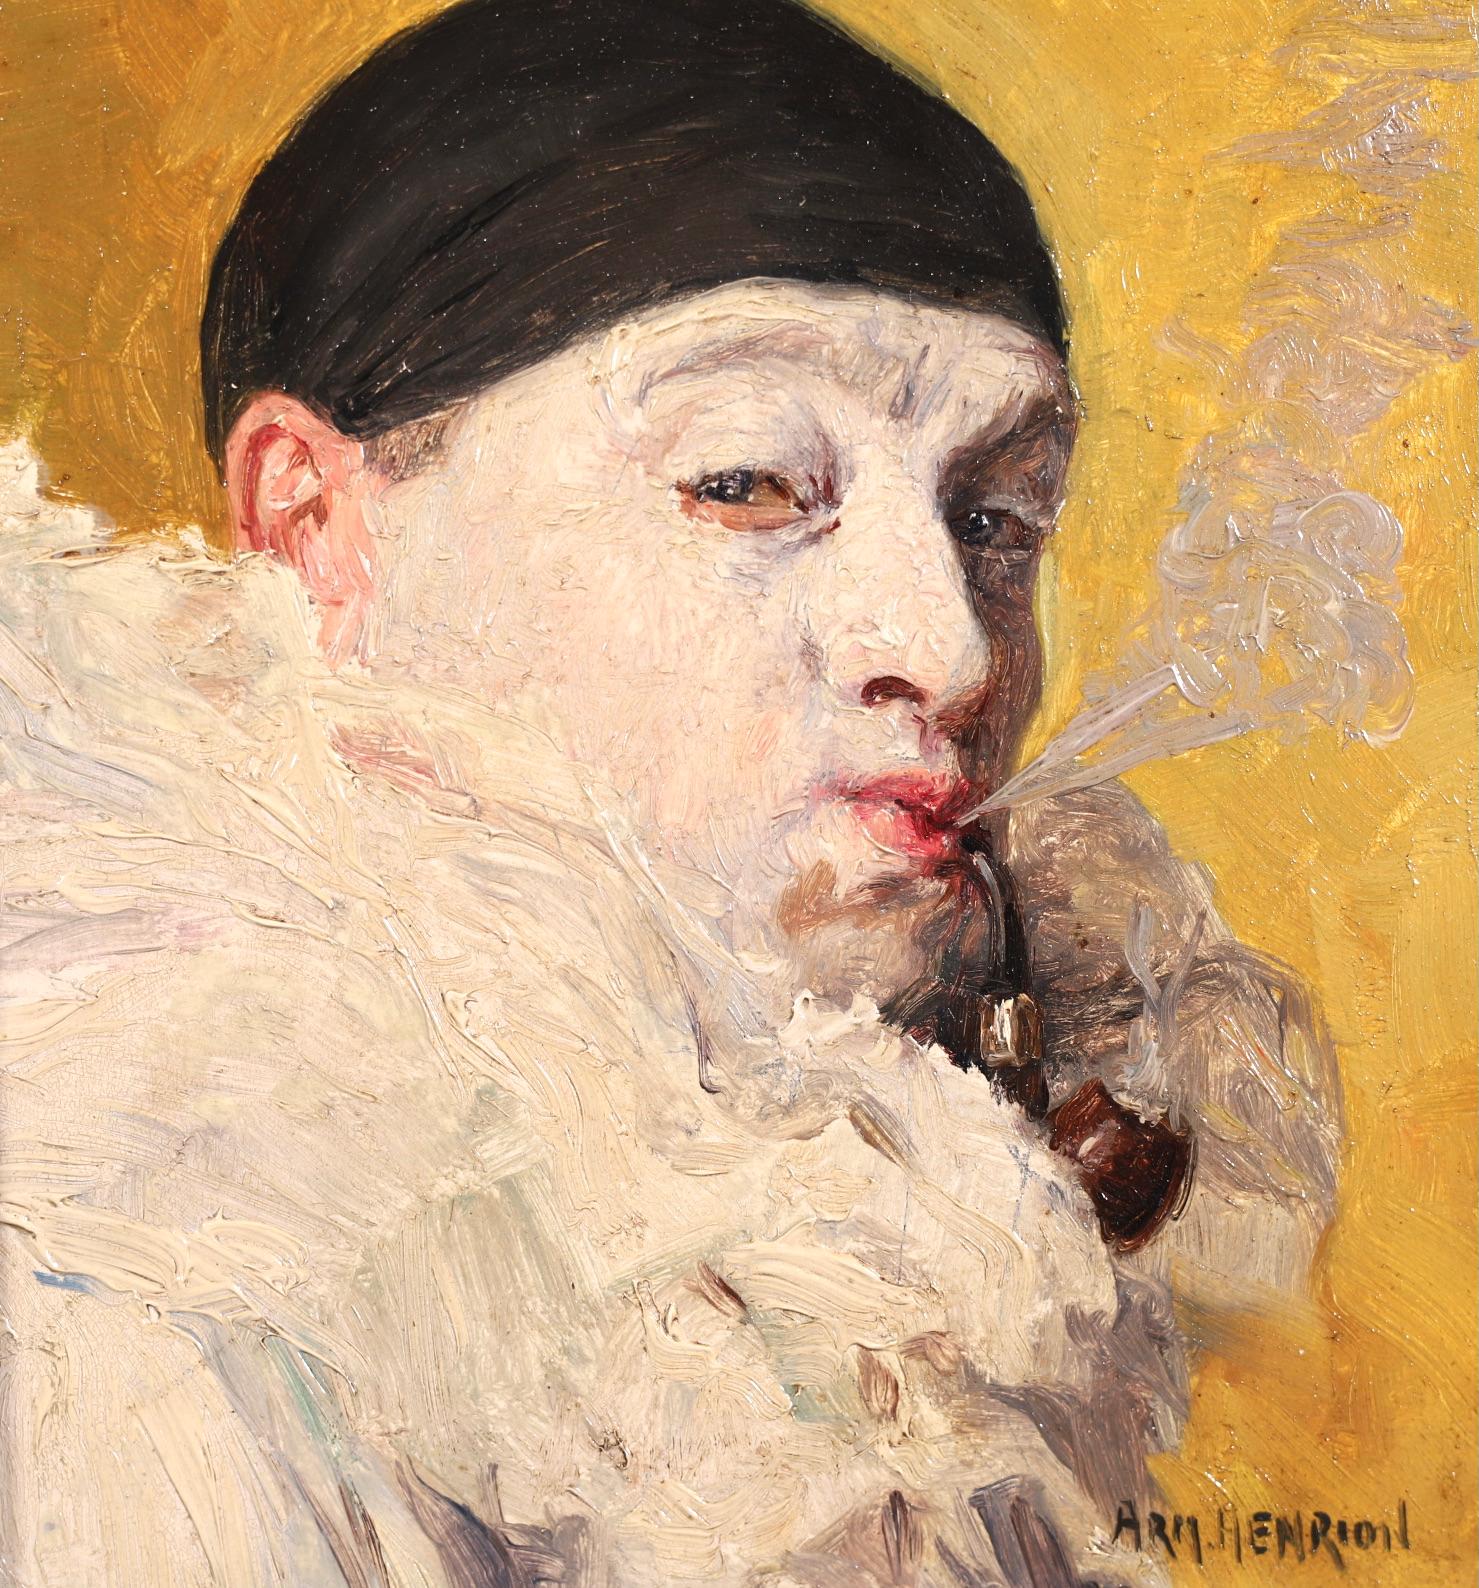 A charming oil on panel circa 1900 by French impressionist painter Armand Francois Henrion depicting a portrait of a Pierrot - a French clown - wearing white ruffles and a black hat smoking a wooden pipe. The portrait is set against a yellow-gold